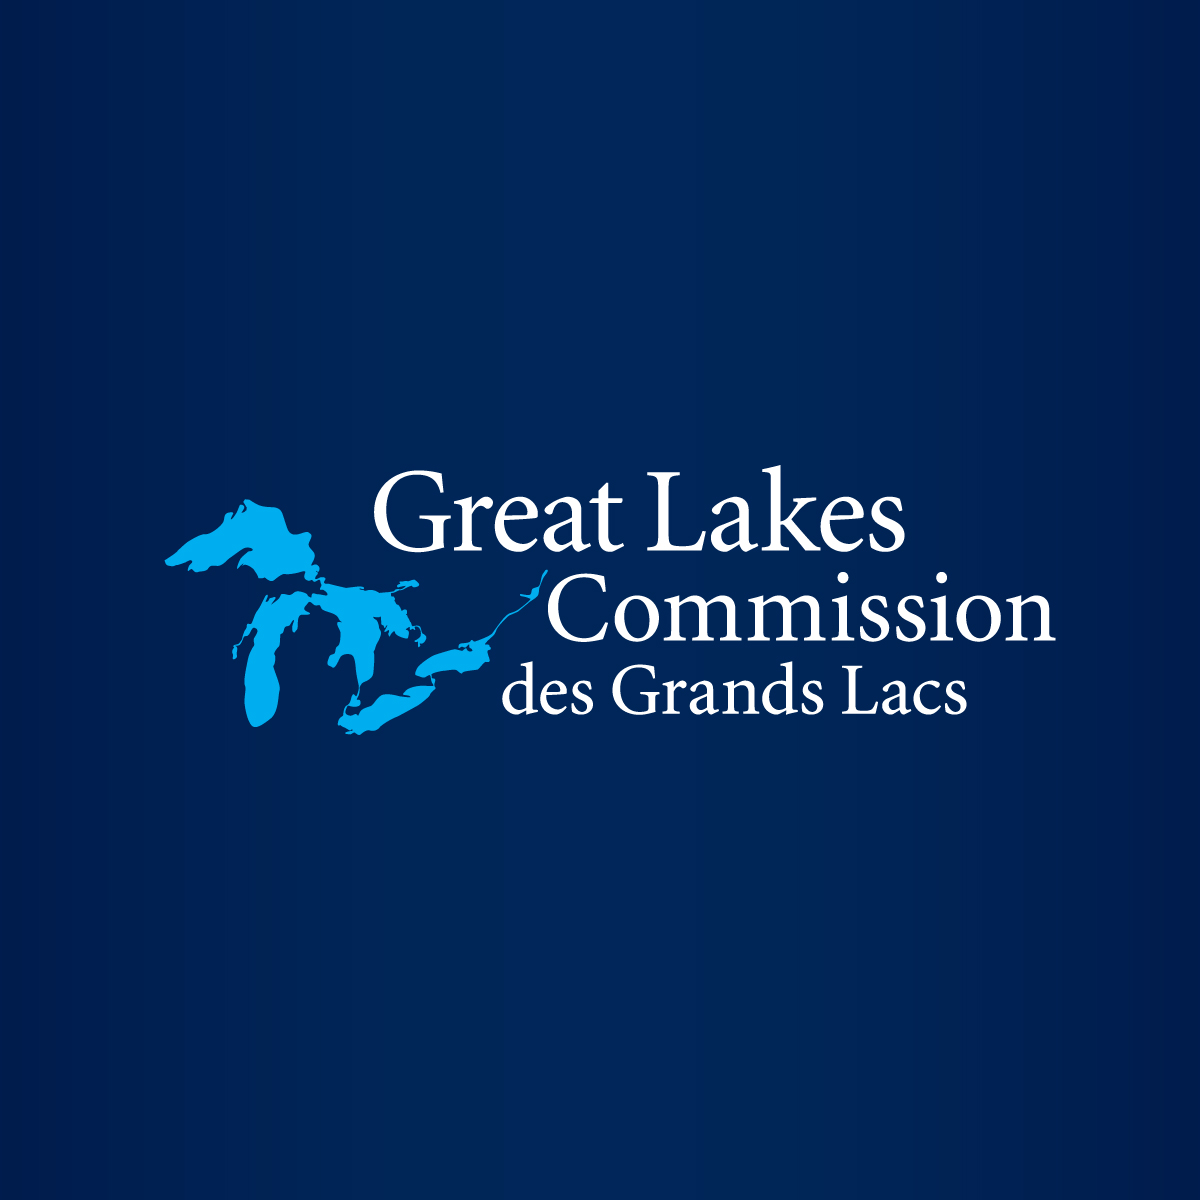 the great lakes recognized as the first freshwater hope spot